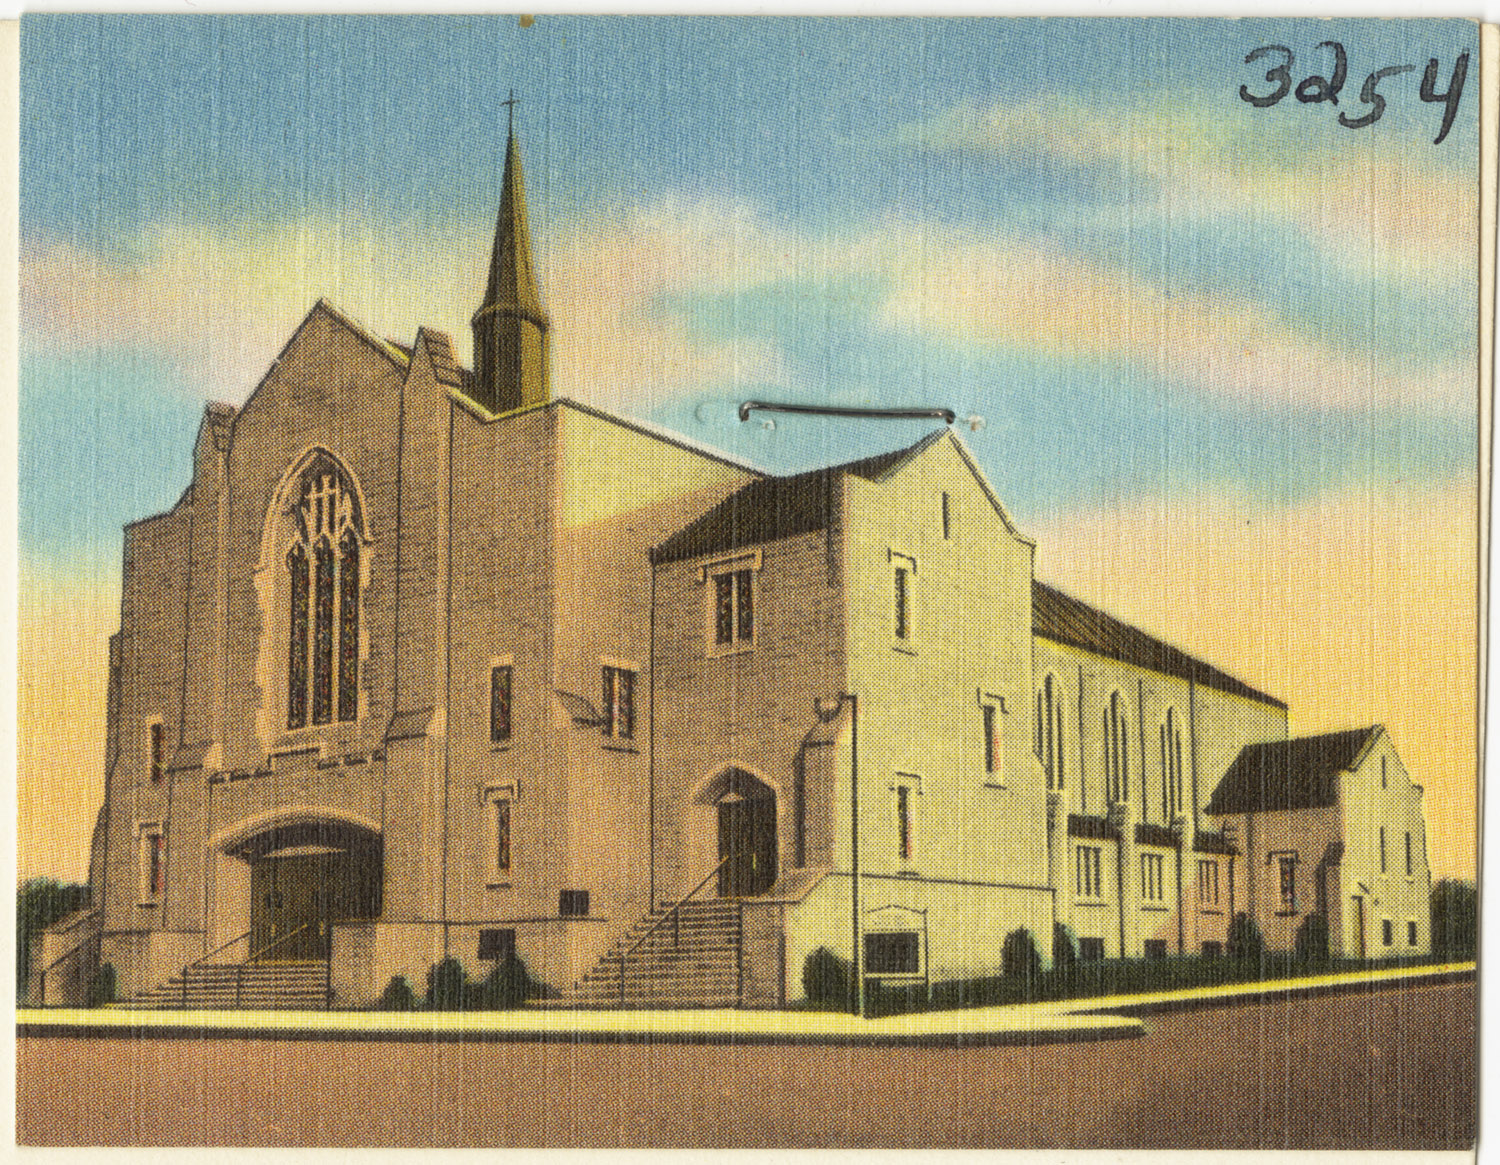 this old picture depicts an old church building